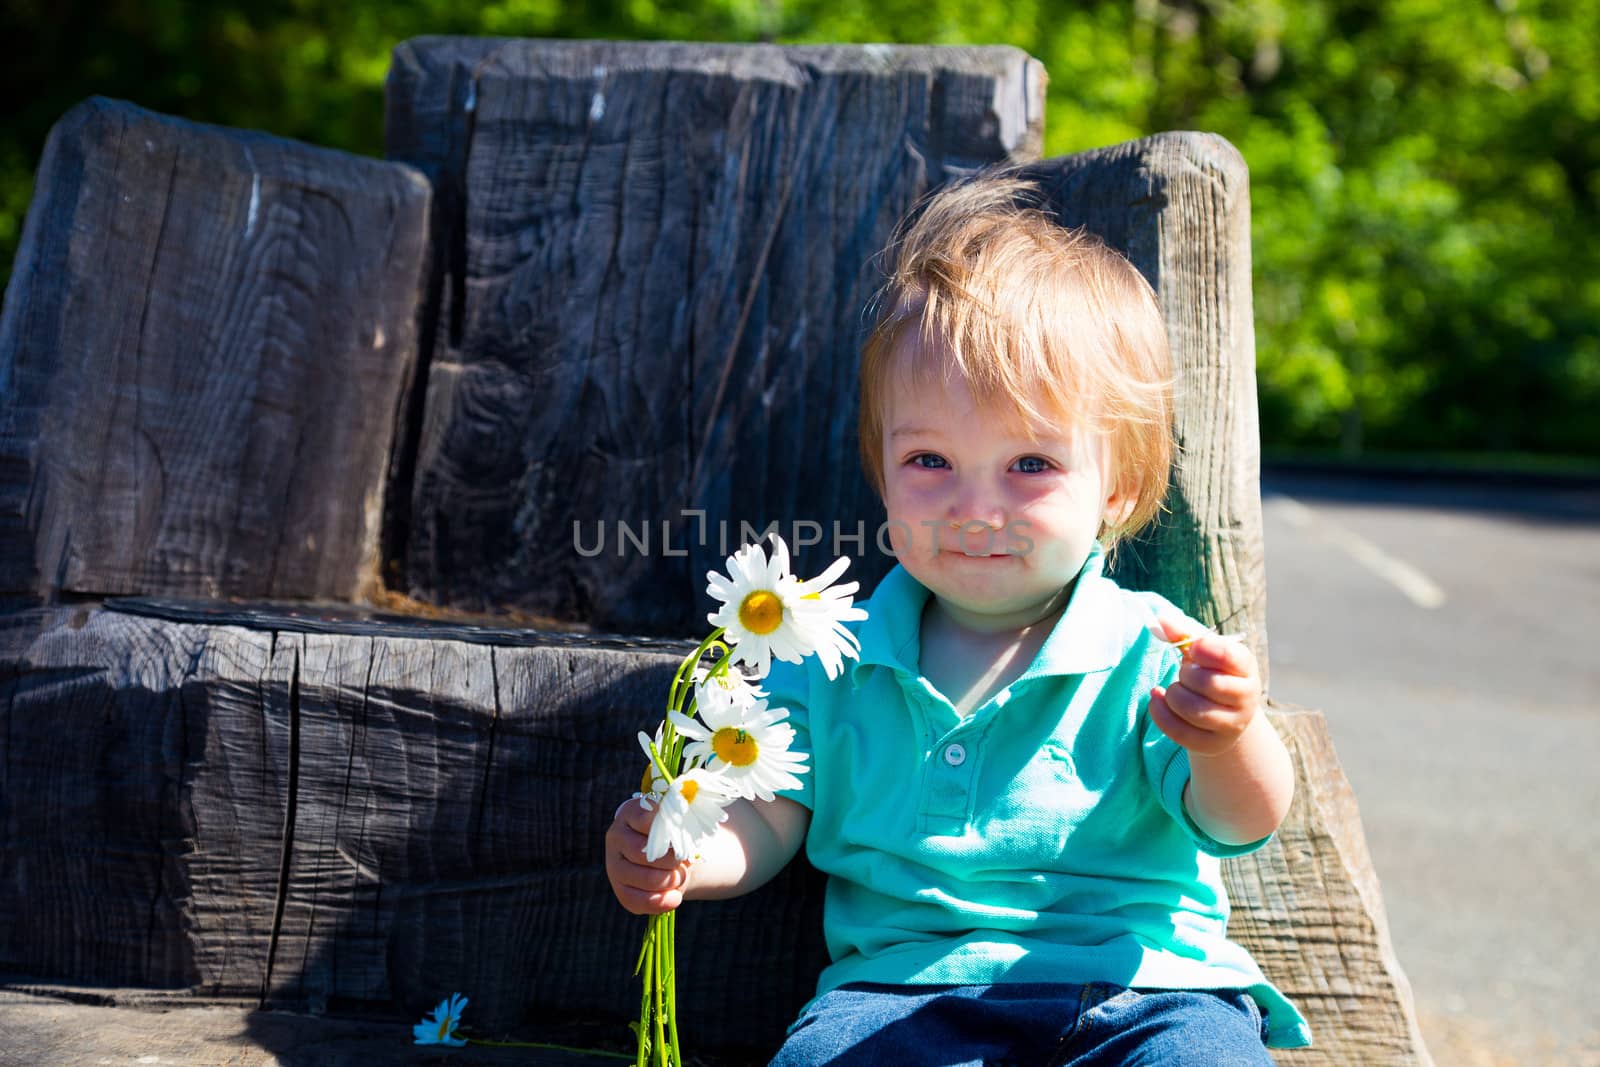 A young boy plays with some flowers while sitting on a hand carved seat made from an old stump.